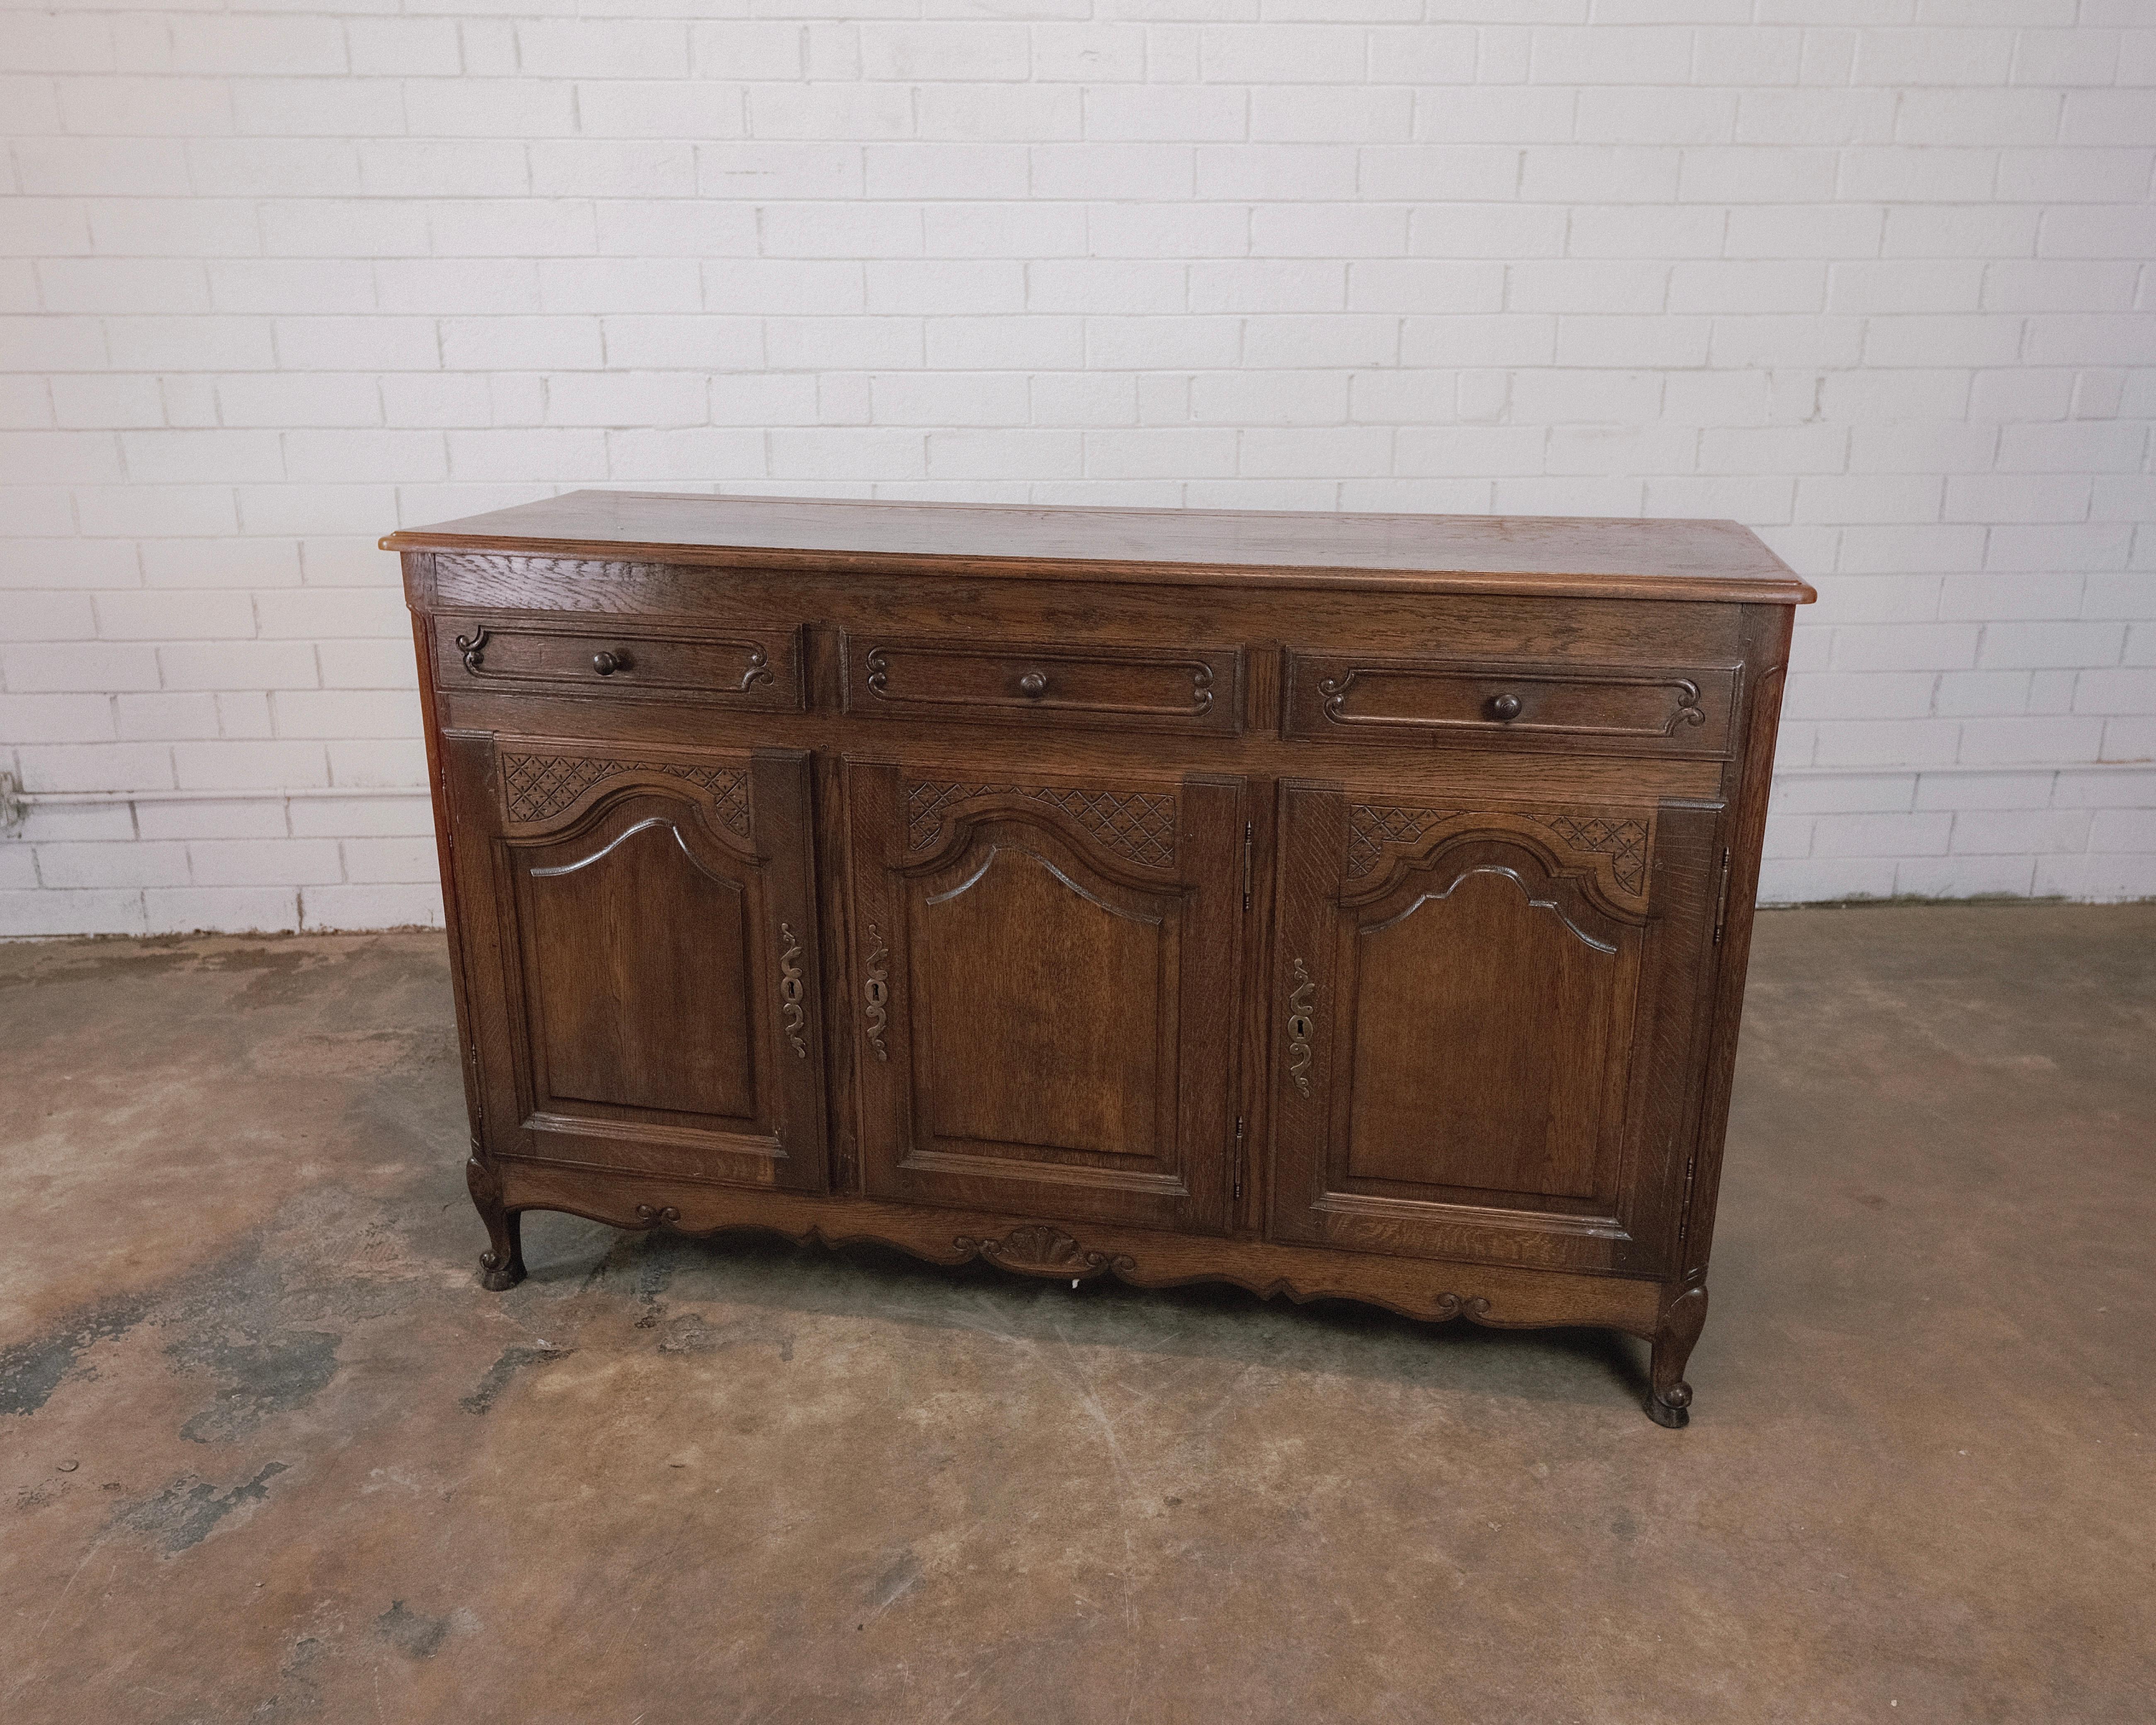 19th Century Late 19th - Early 20th Century, Antique French Country Sideboard